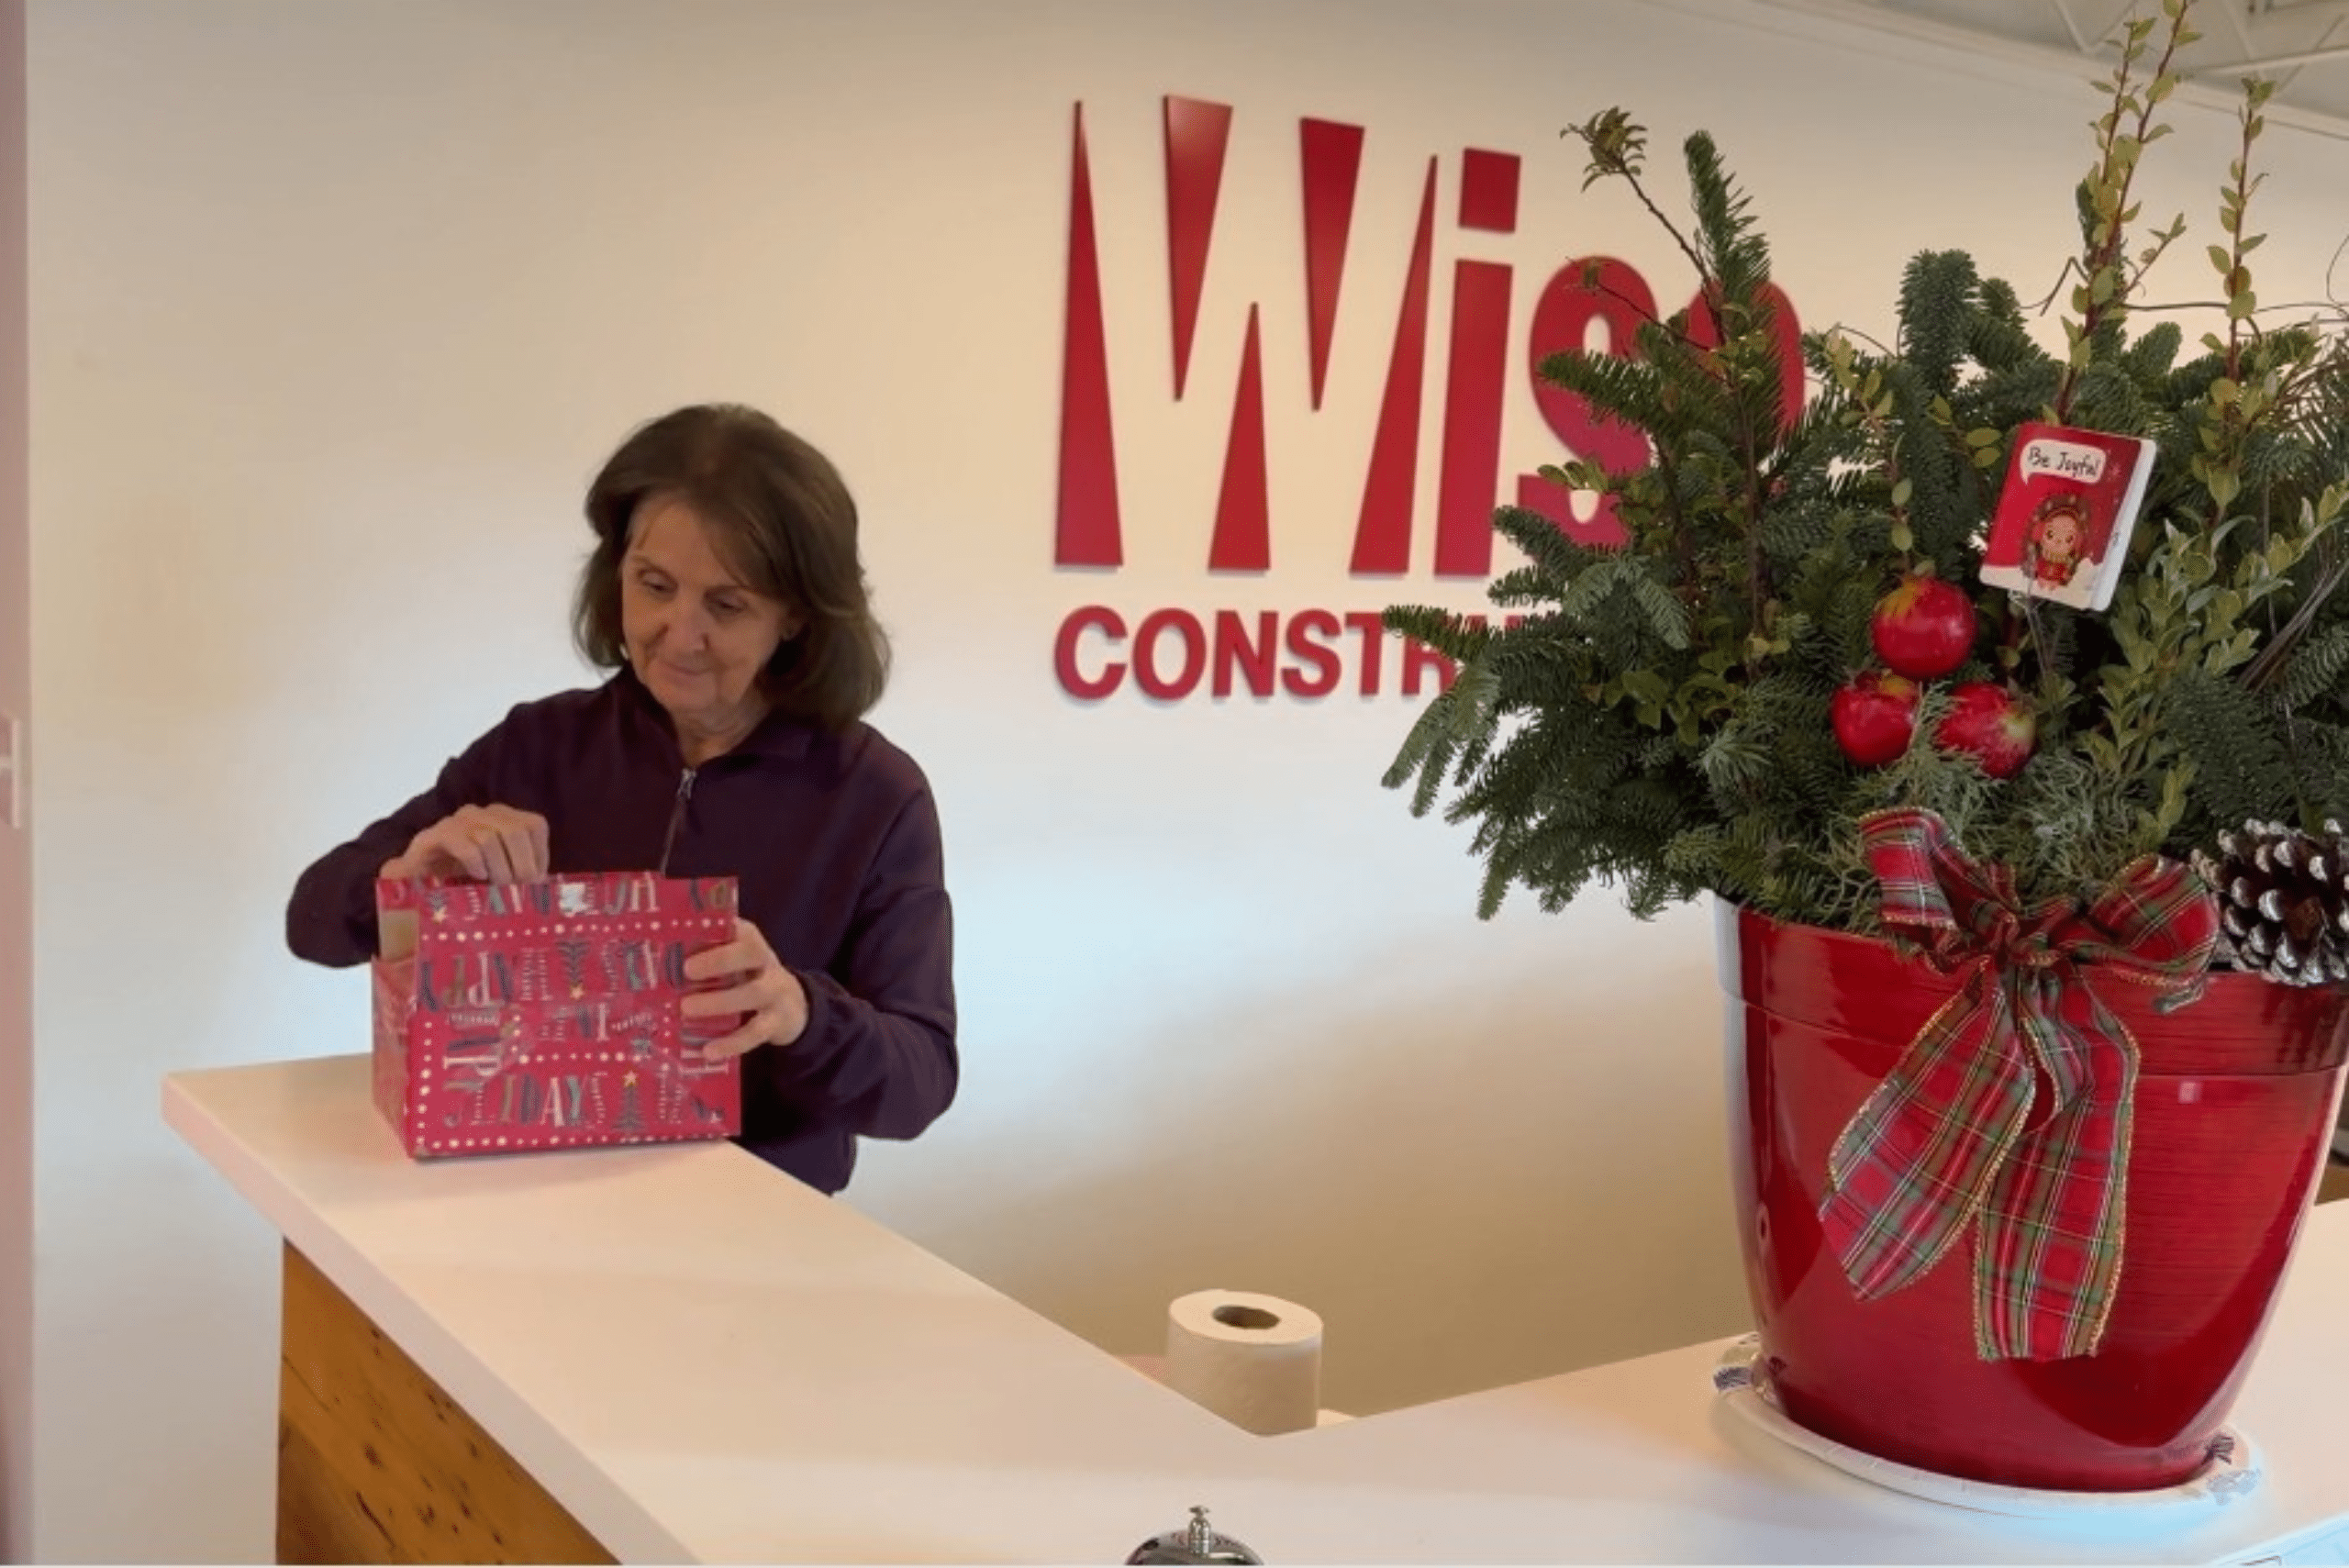 happy holidays from wise